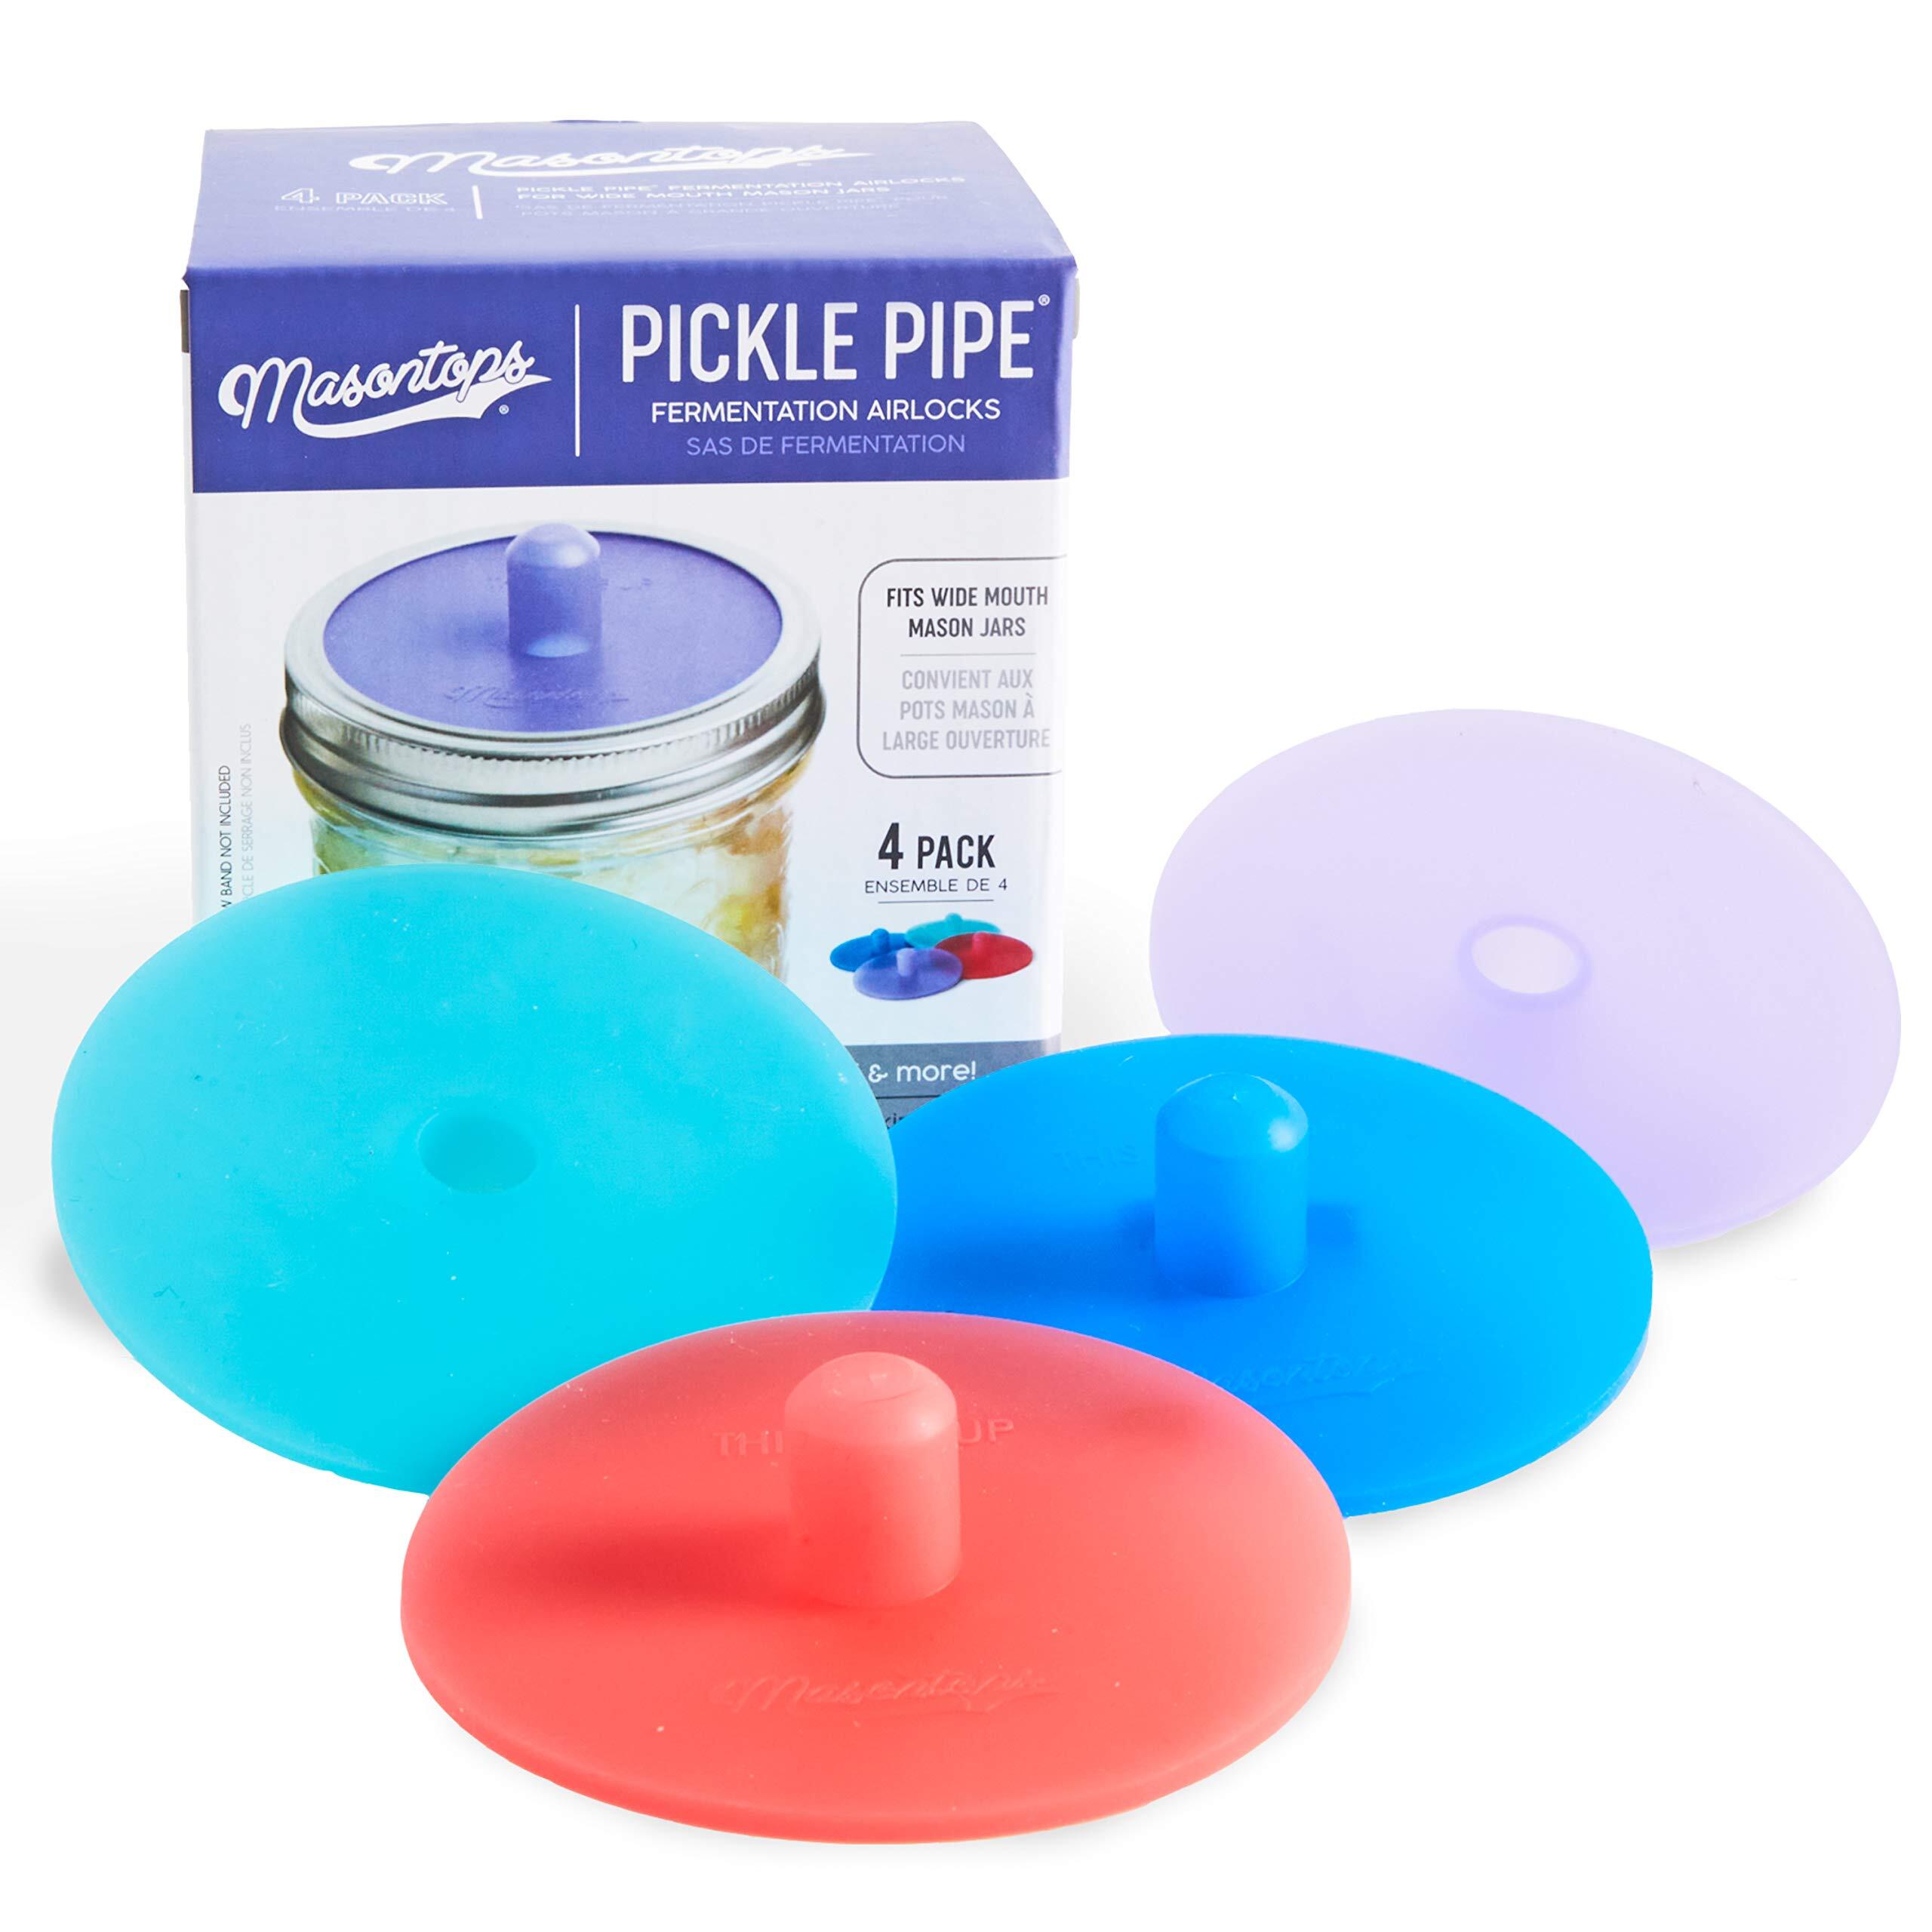 Masontops Pickle Pipe Silicon Airlock - 4 pack